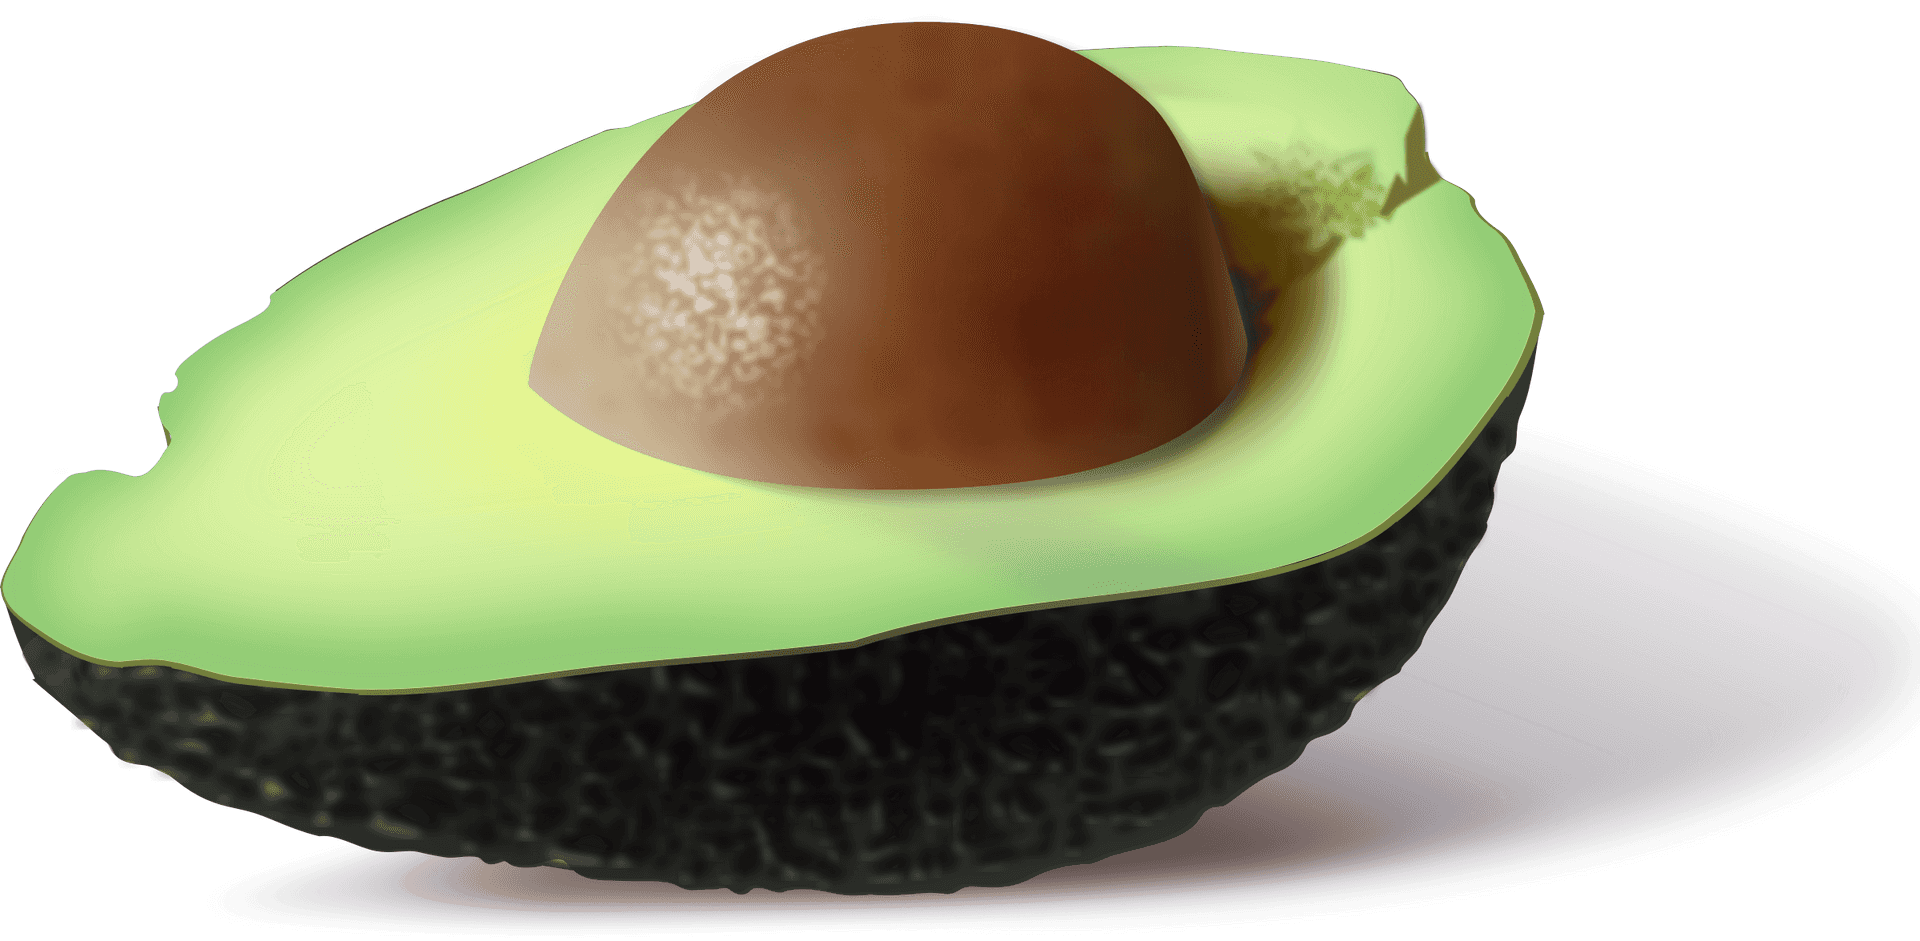 Half Avocadowith Pit PNG